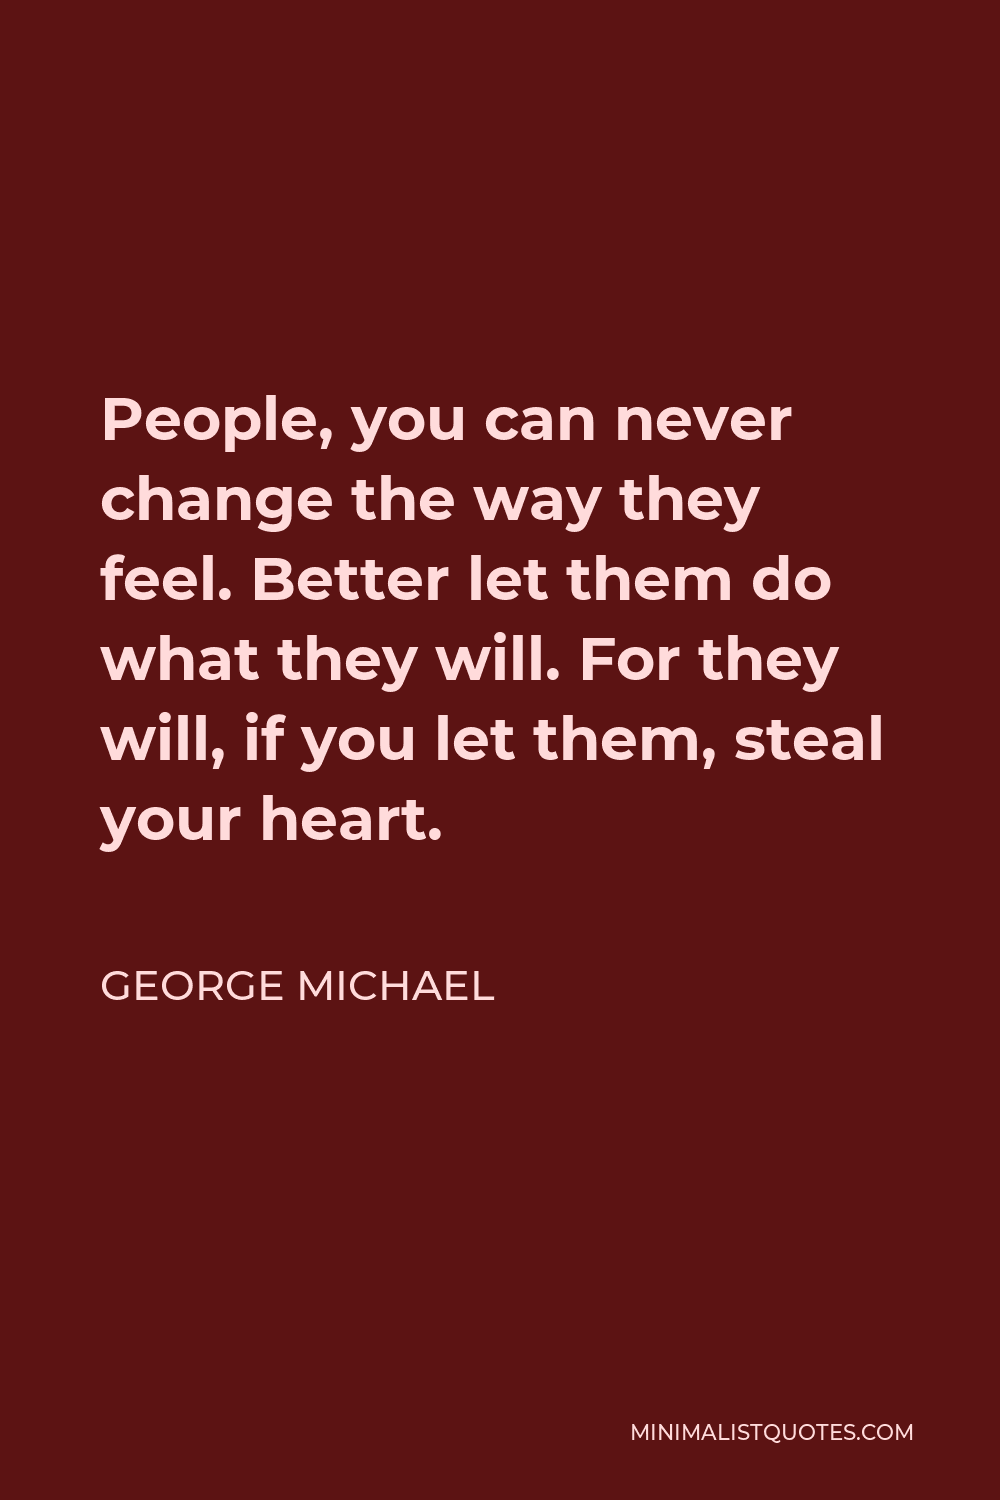 George Michael Quote - People, you can never change the way they feel. Better let them do what they will. For they will, if you let them, steal your heart.